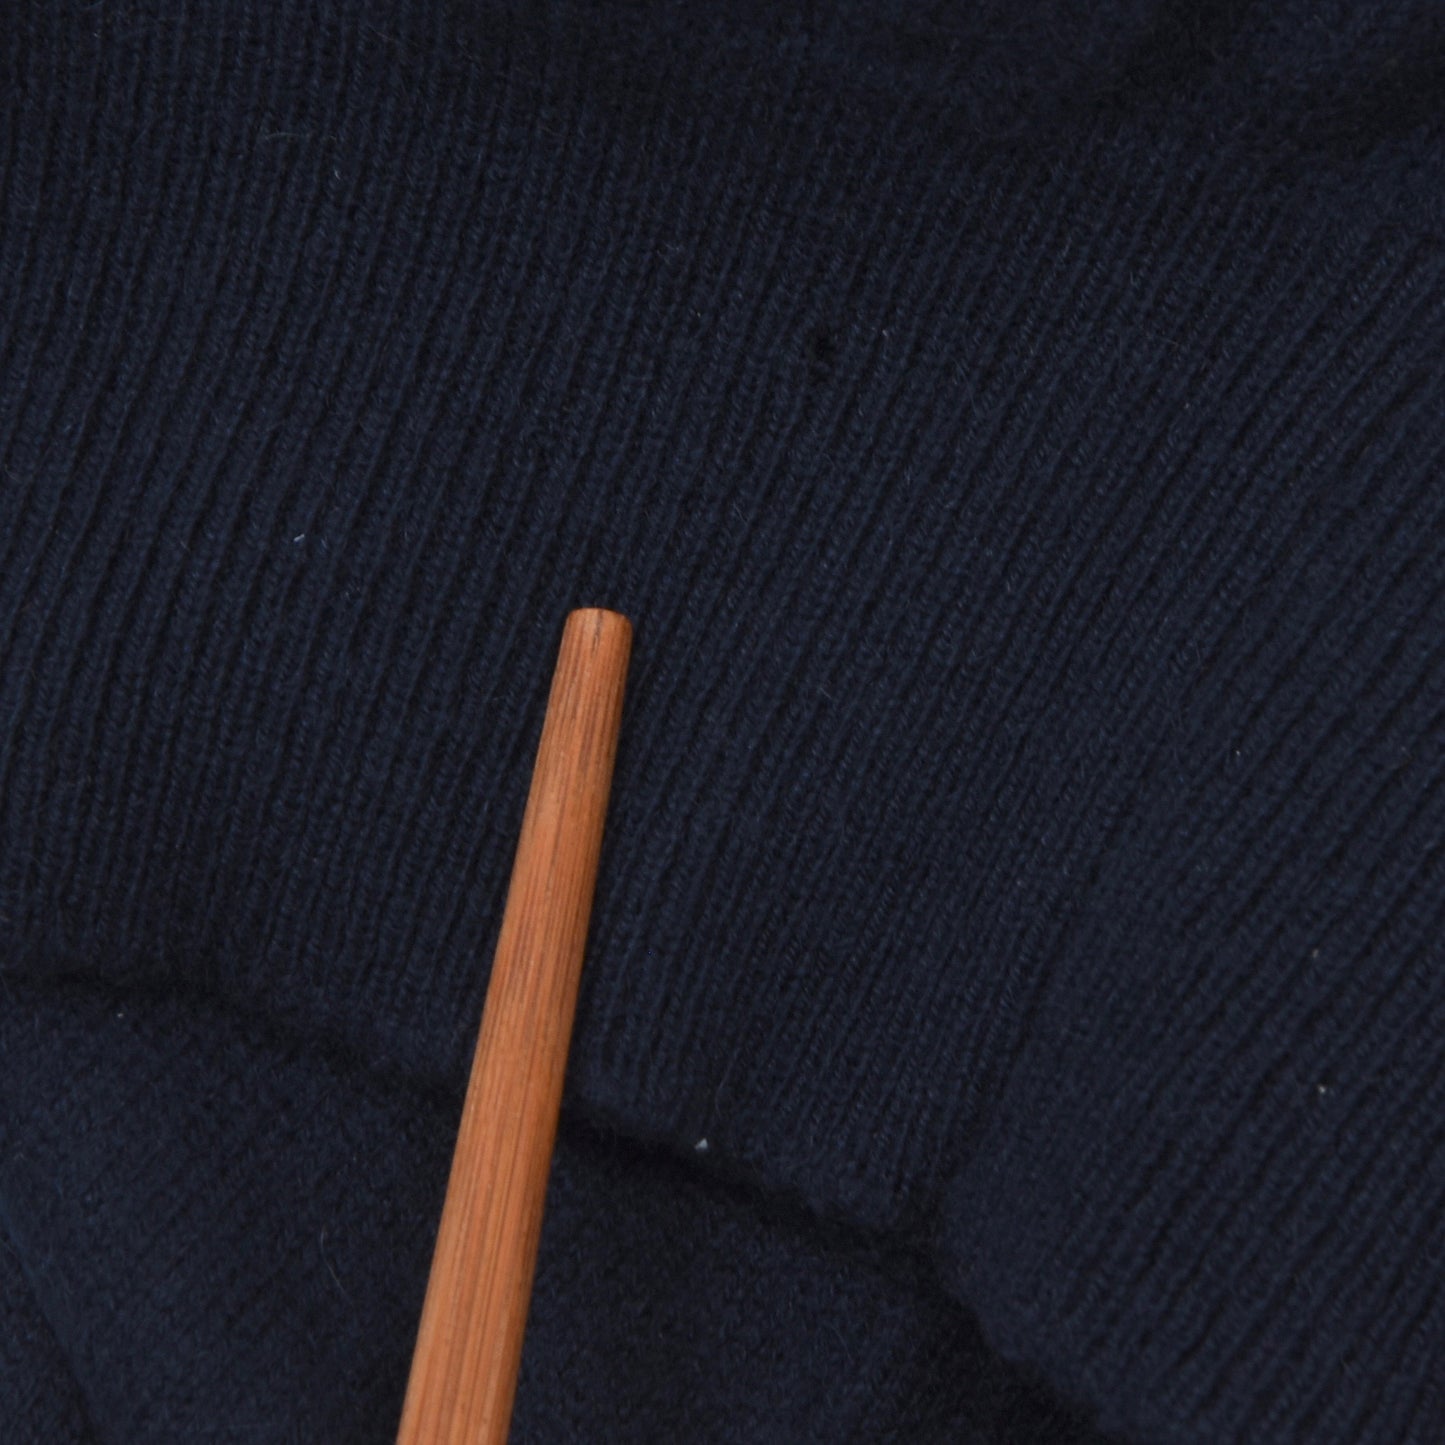 Anonymous 100% Cashmere V-Neck Sweater Size 50 - Navy Blue